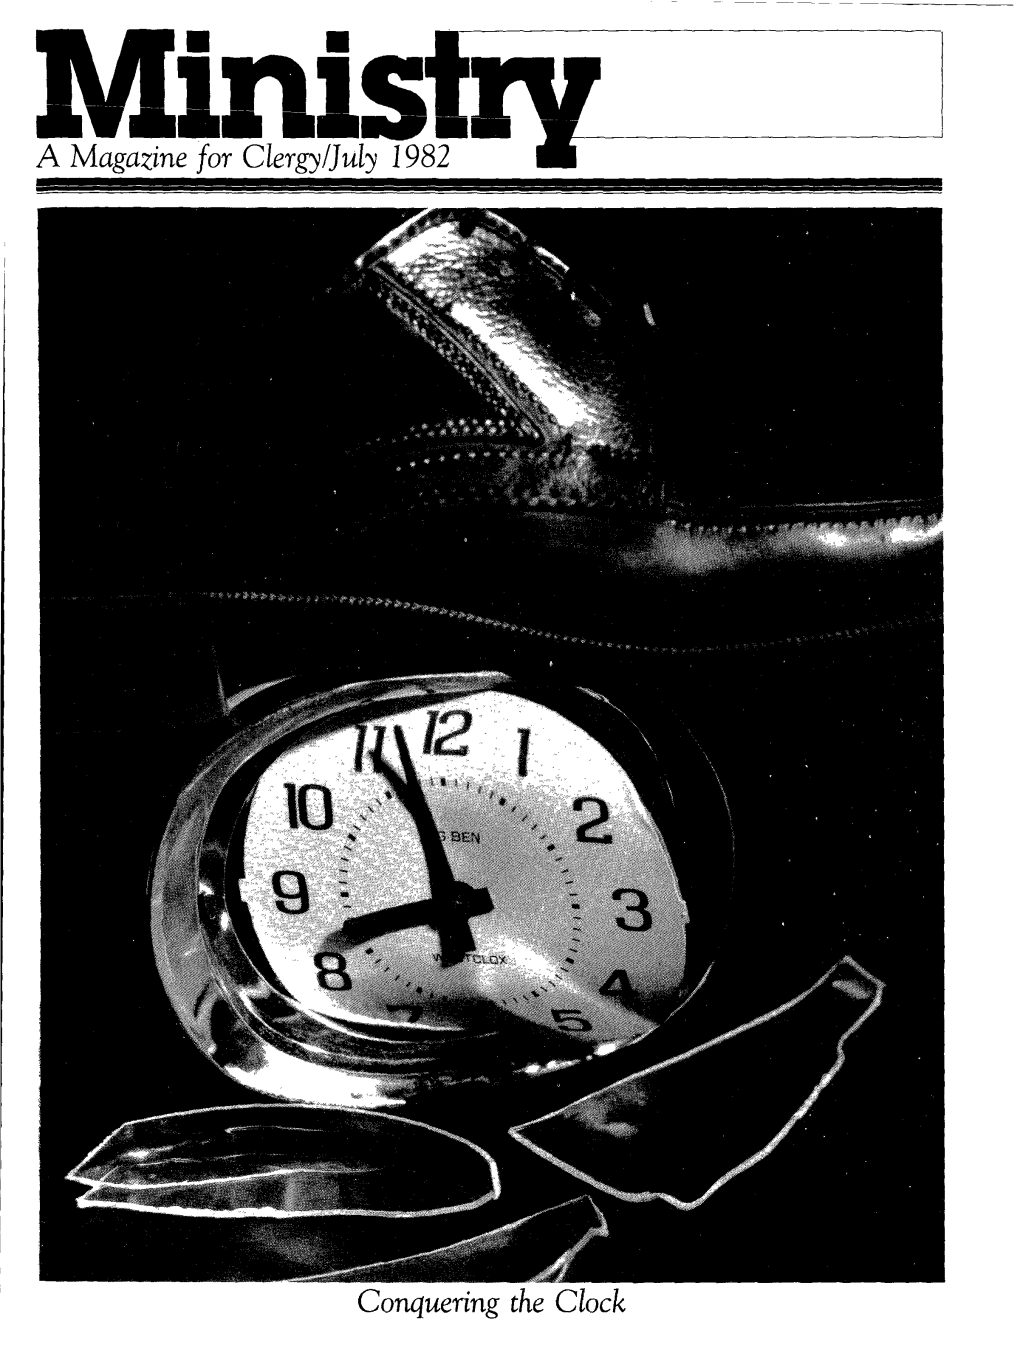 A Magazine for Clergy/July 1 982 •• Conquering the Clock